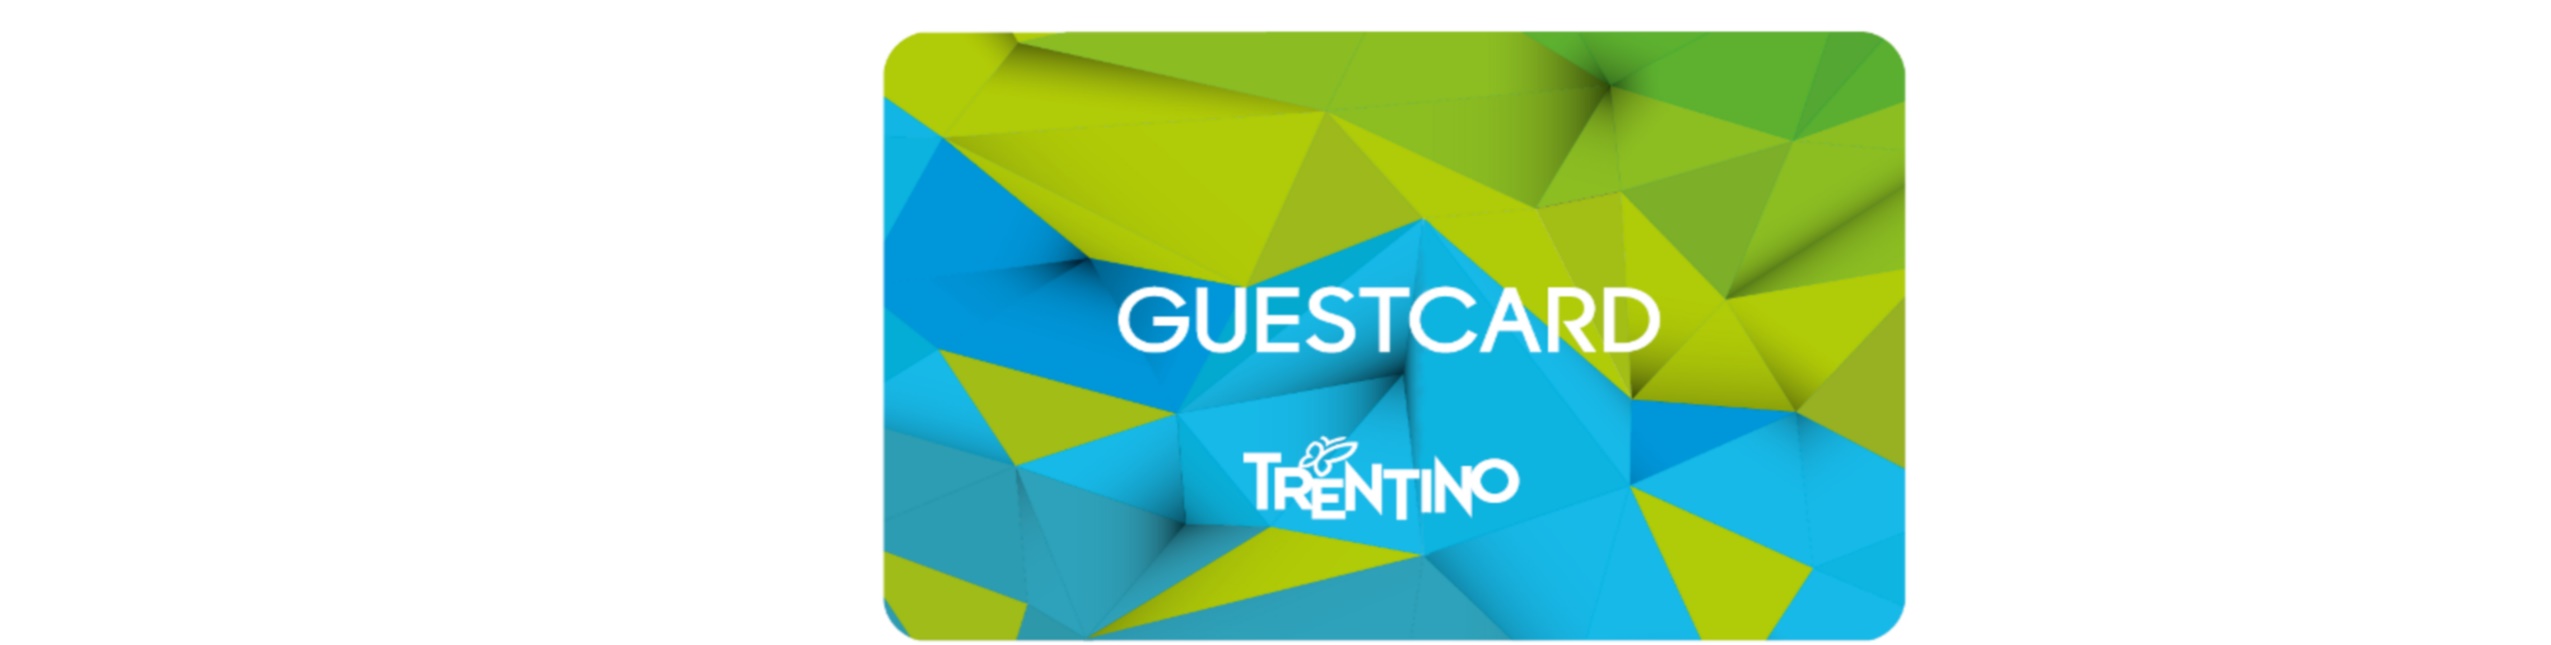 Trentino-Guest-Card Hotel Grizzly Folgaria